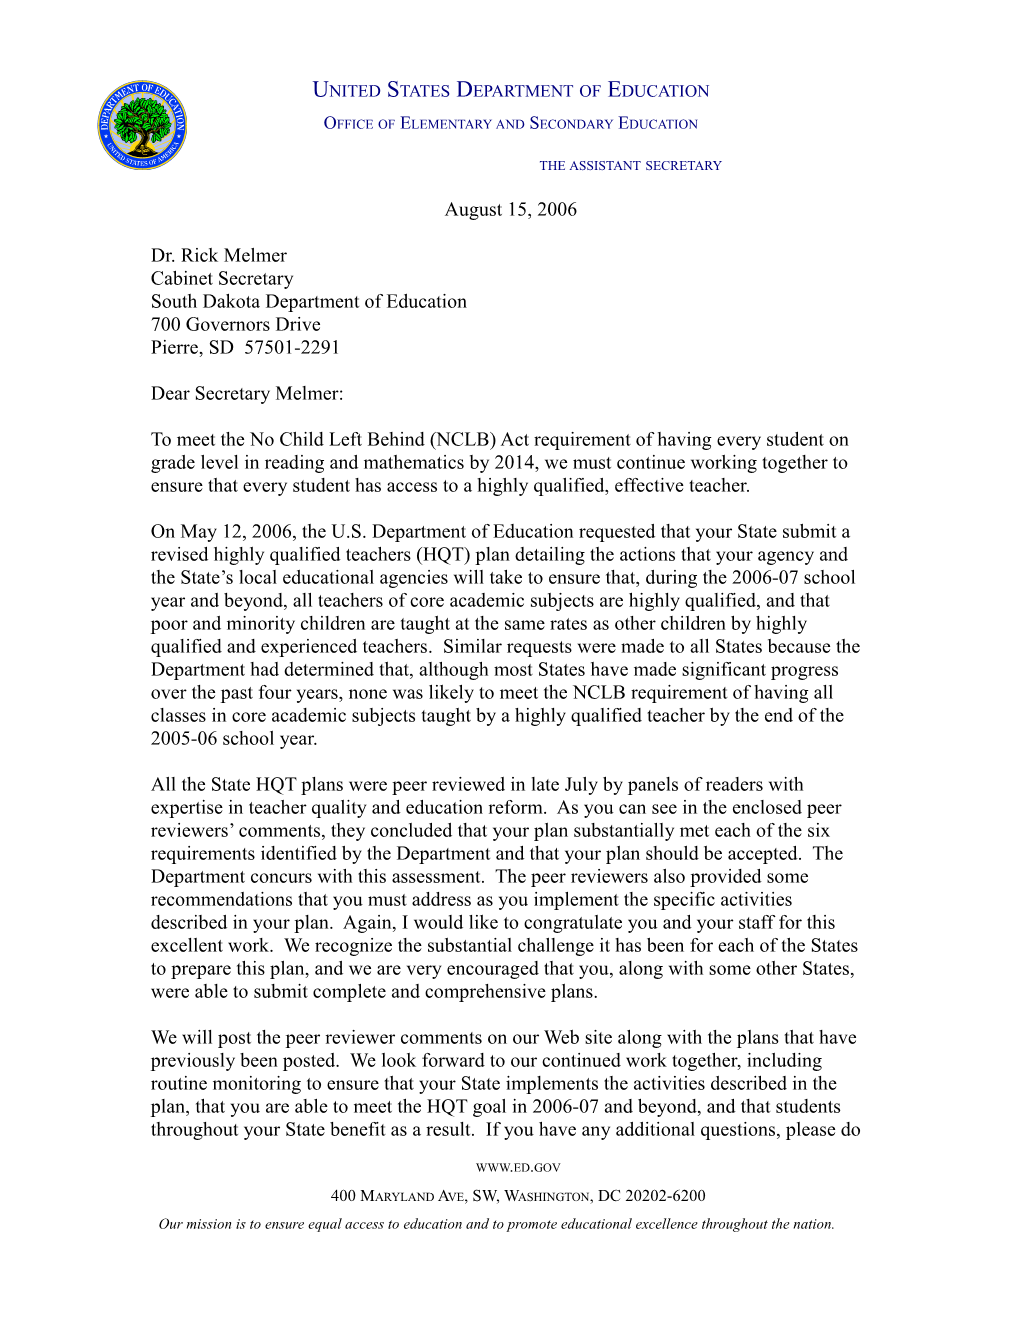 South Dakota Letter to Chief State School Officer Regarding the Peer Review Comments Of